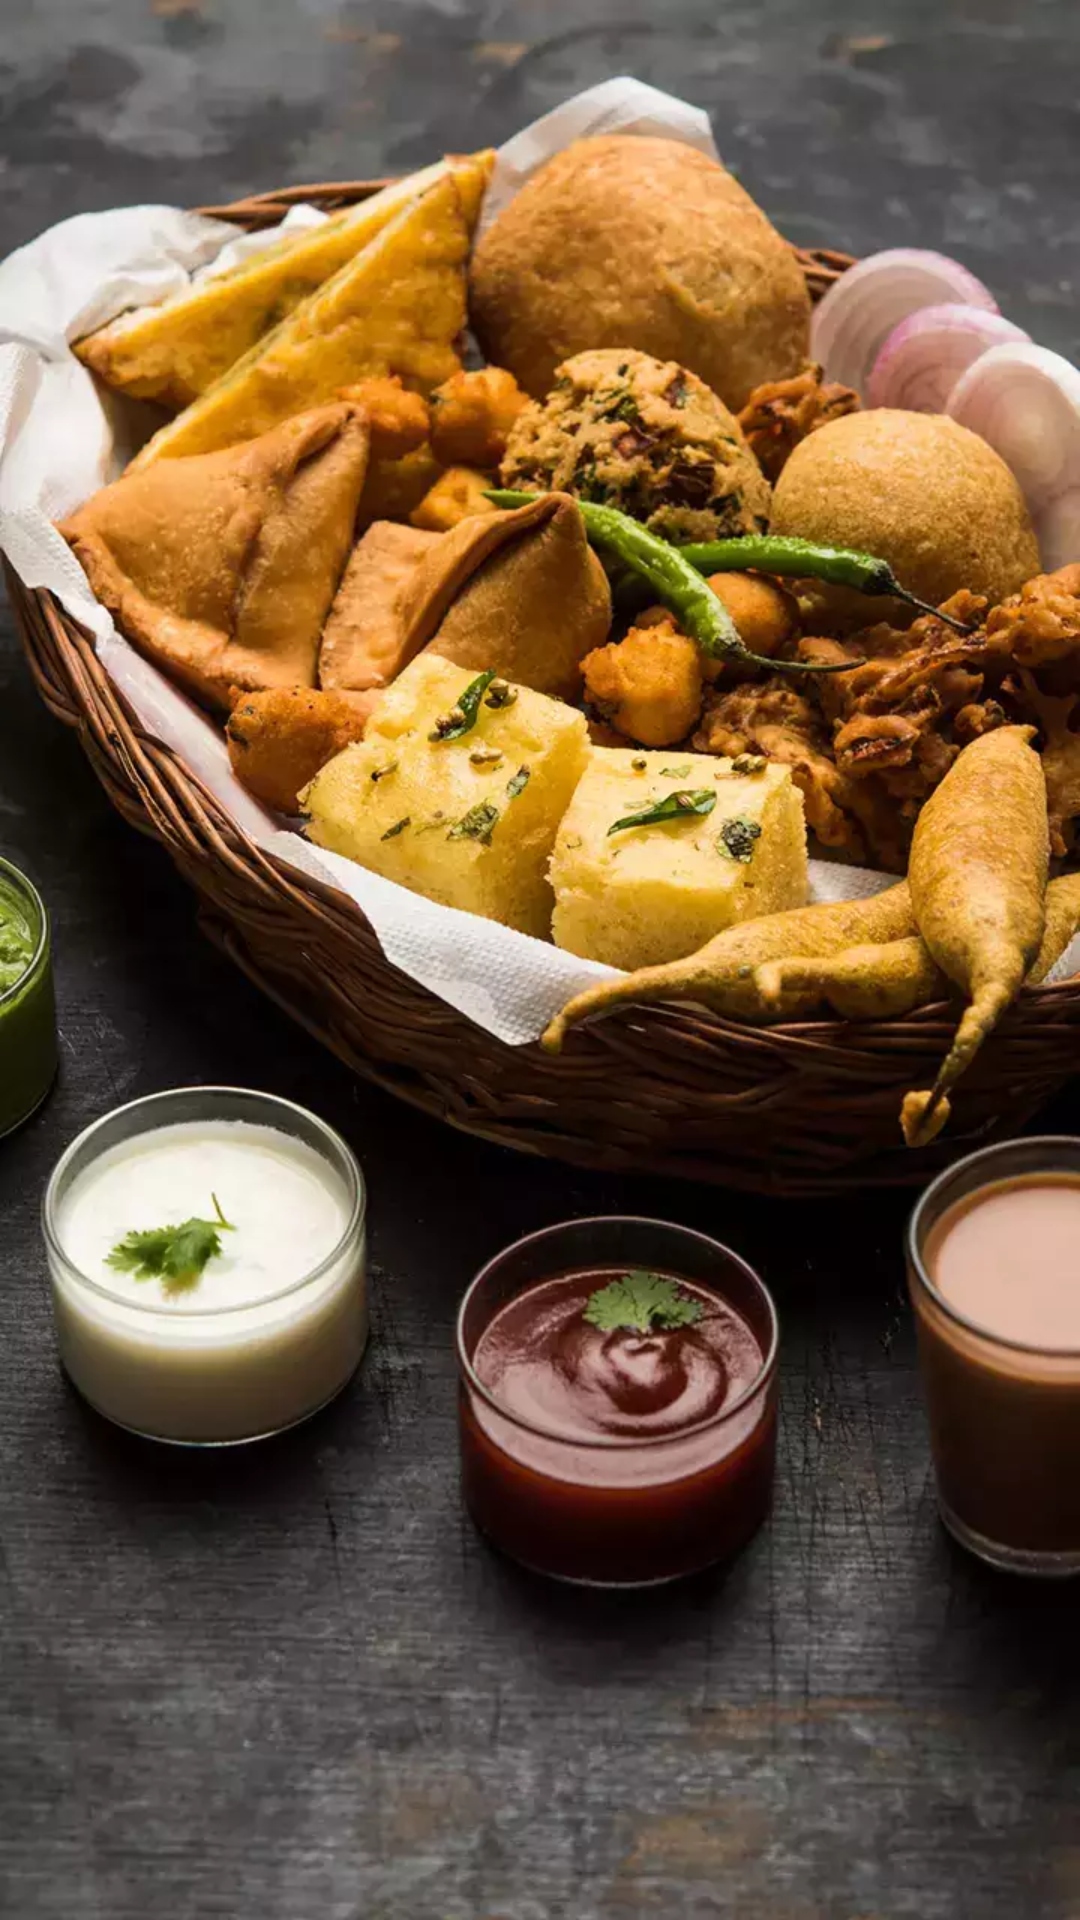 5 delicious and healthy snacks to satisfy your monsoon cravings